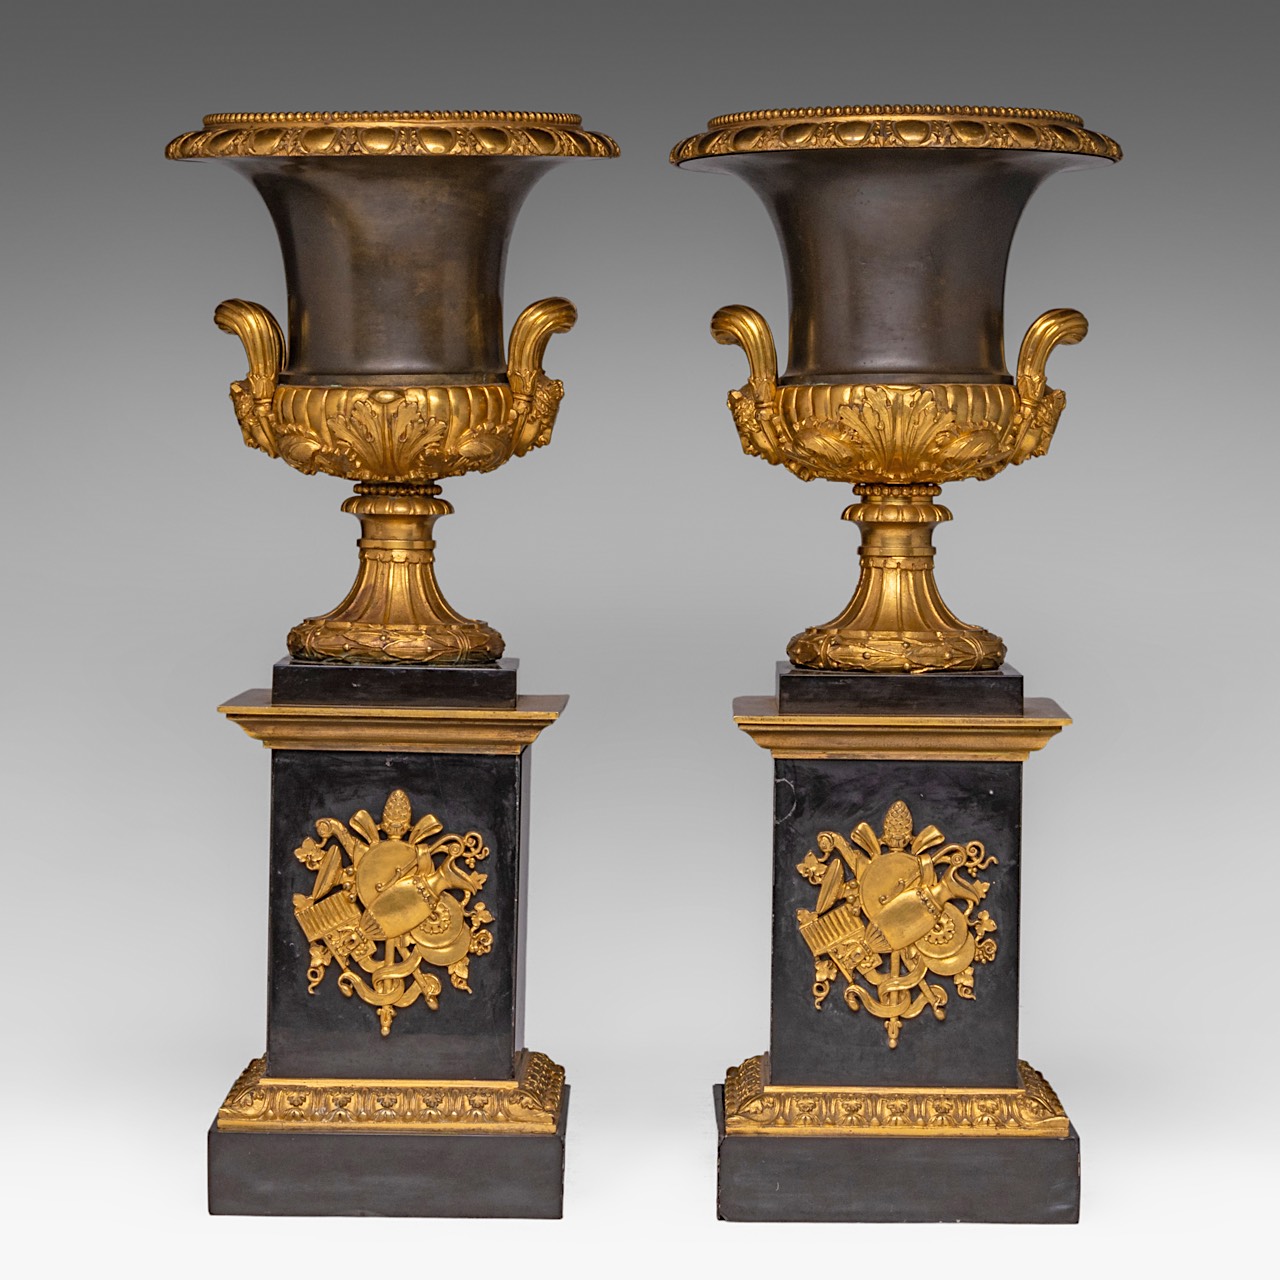 A fine pair of Neoclassical patinated and gilt bronze and black marble Medici type vases, H 45 cm